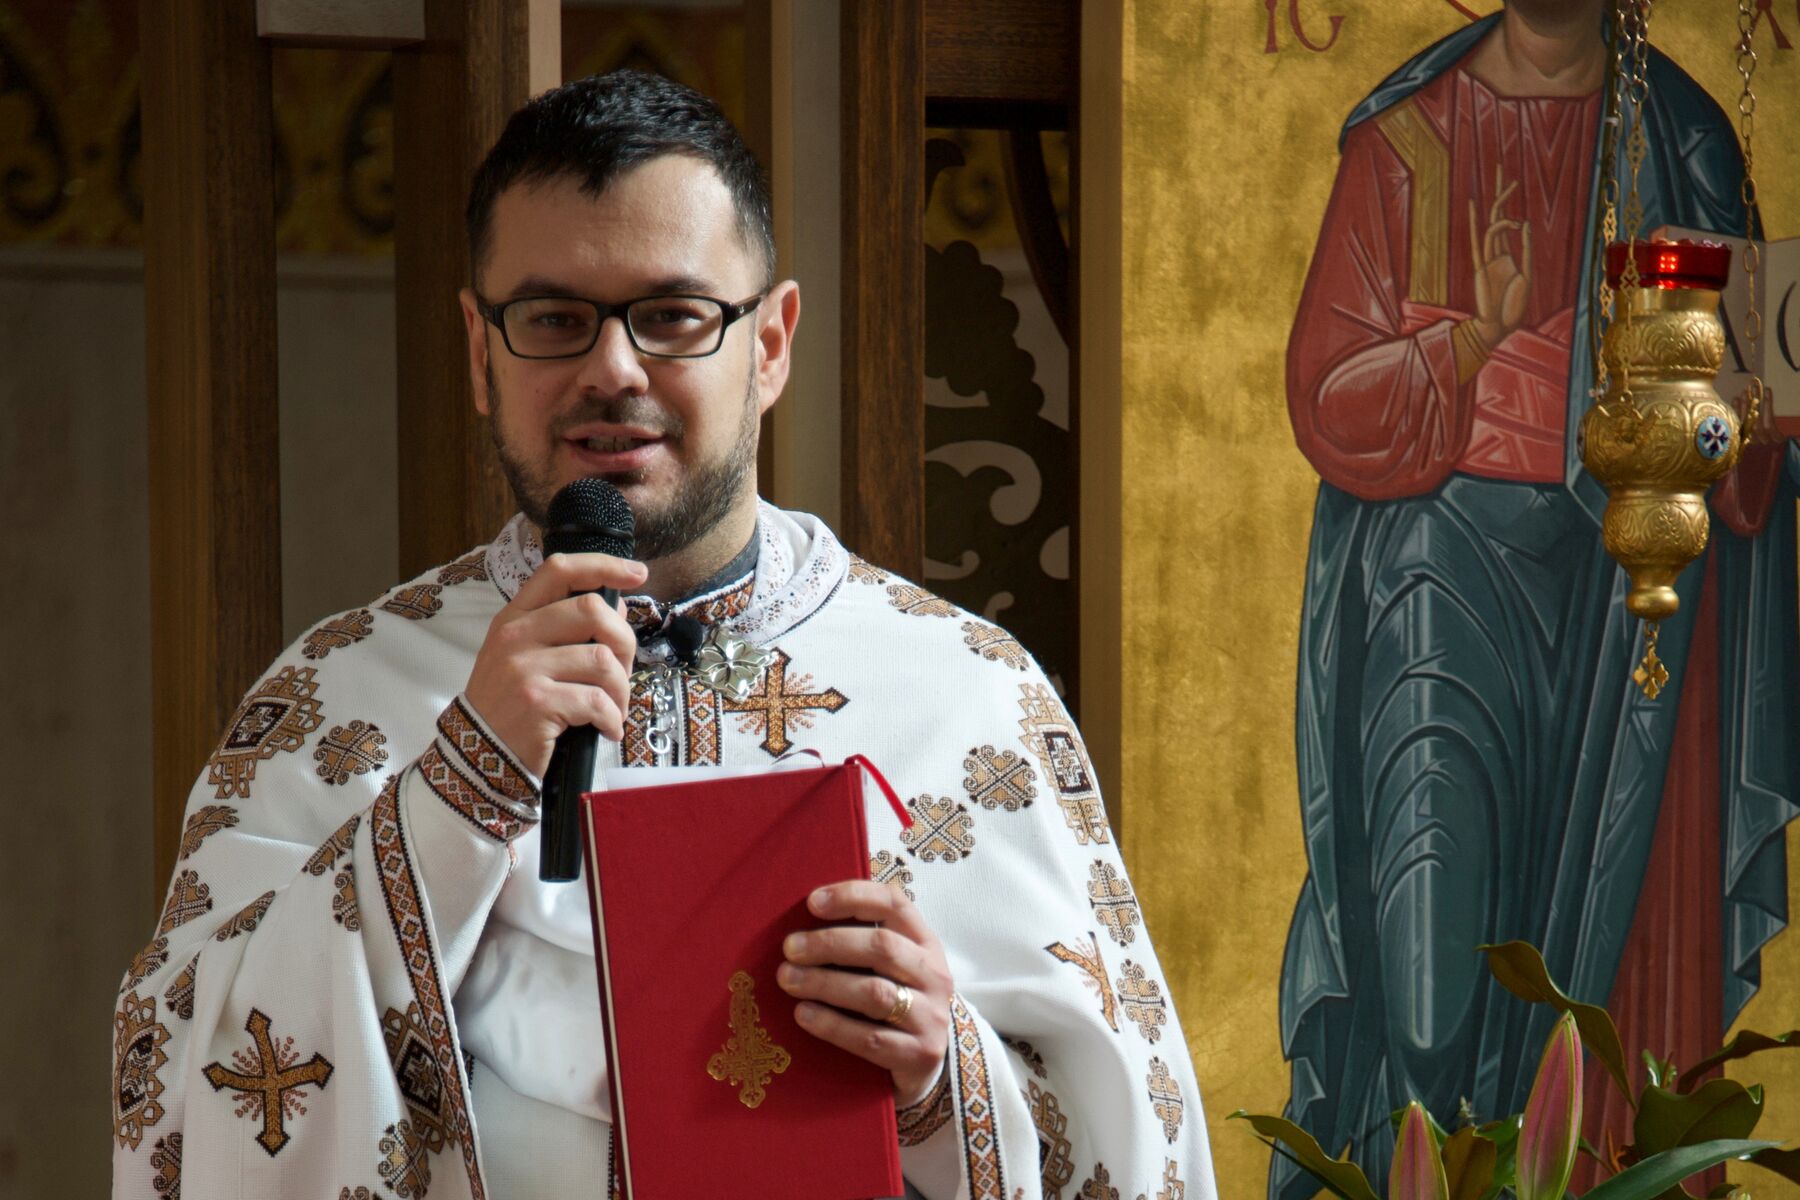 Homily by Fr. Myroslav Vons on the Eleventh Sunday after Pentecost